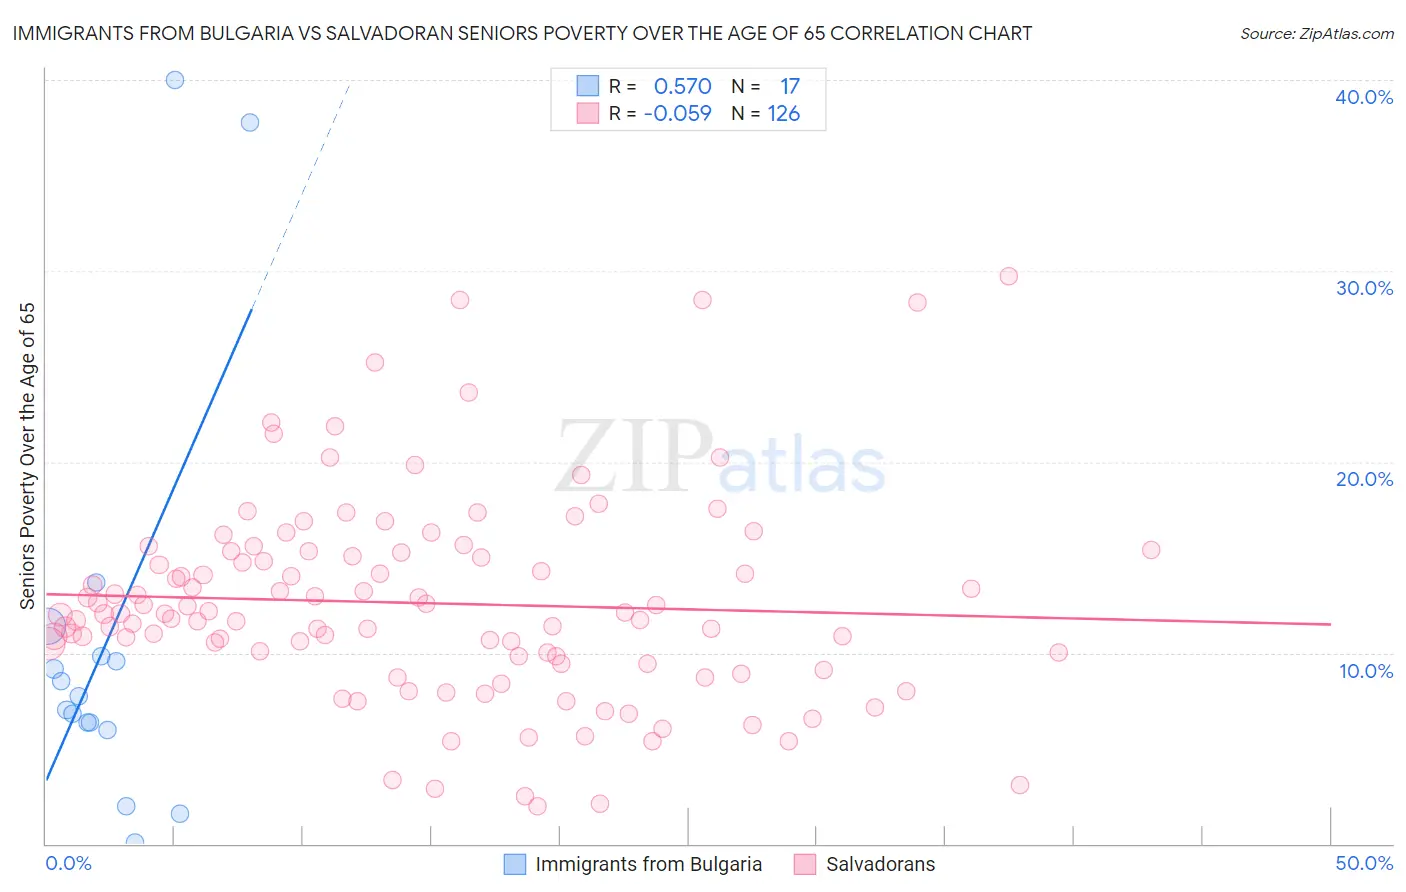 Immigrants from Bulgaria vs Salvadoran Seniors Poverty Over the Age of 65